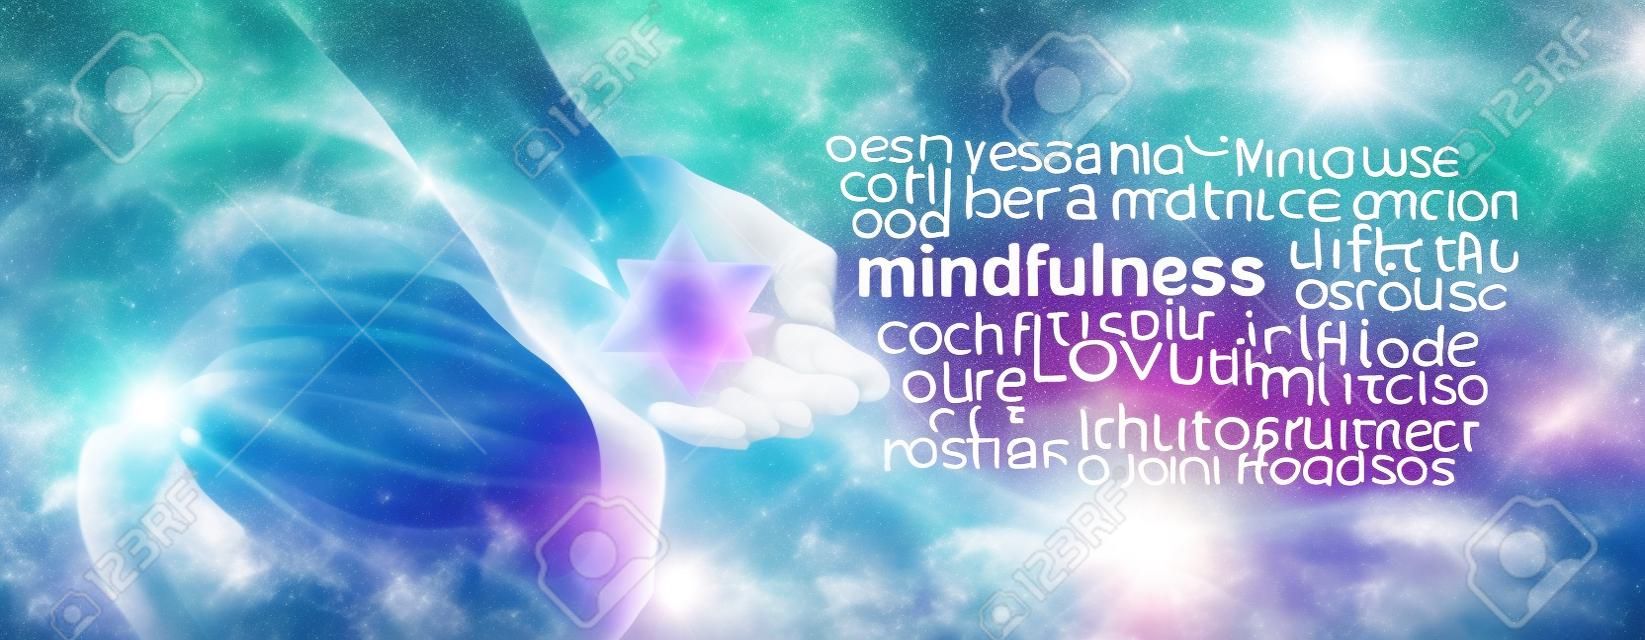 Mindfulness Meditation Word Cloud Banner - Female sitting in Lotus Position on left side with sunlight streaming in holding a Merkabah crystal meditating and a mindfulness word cloud on right side